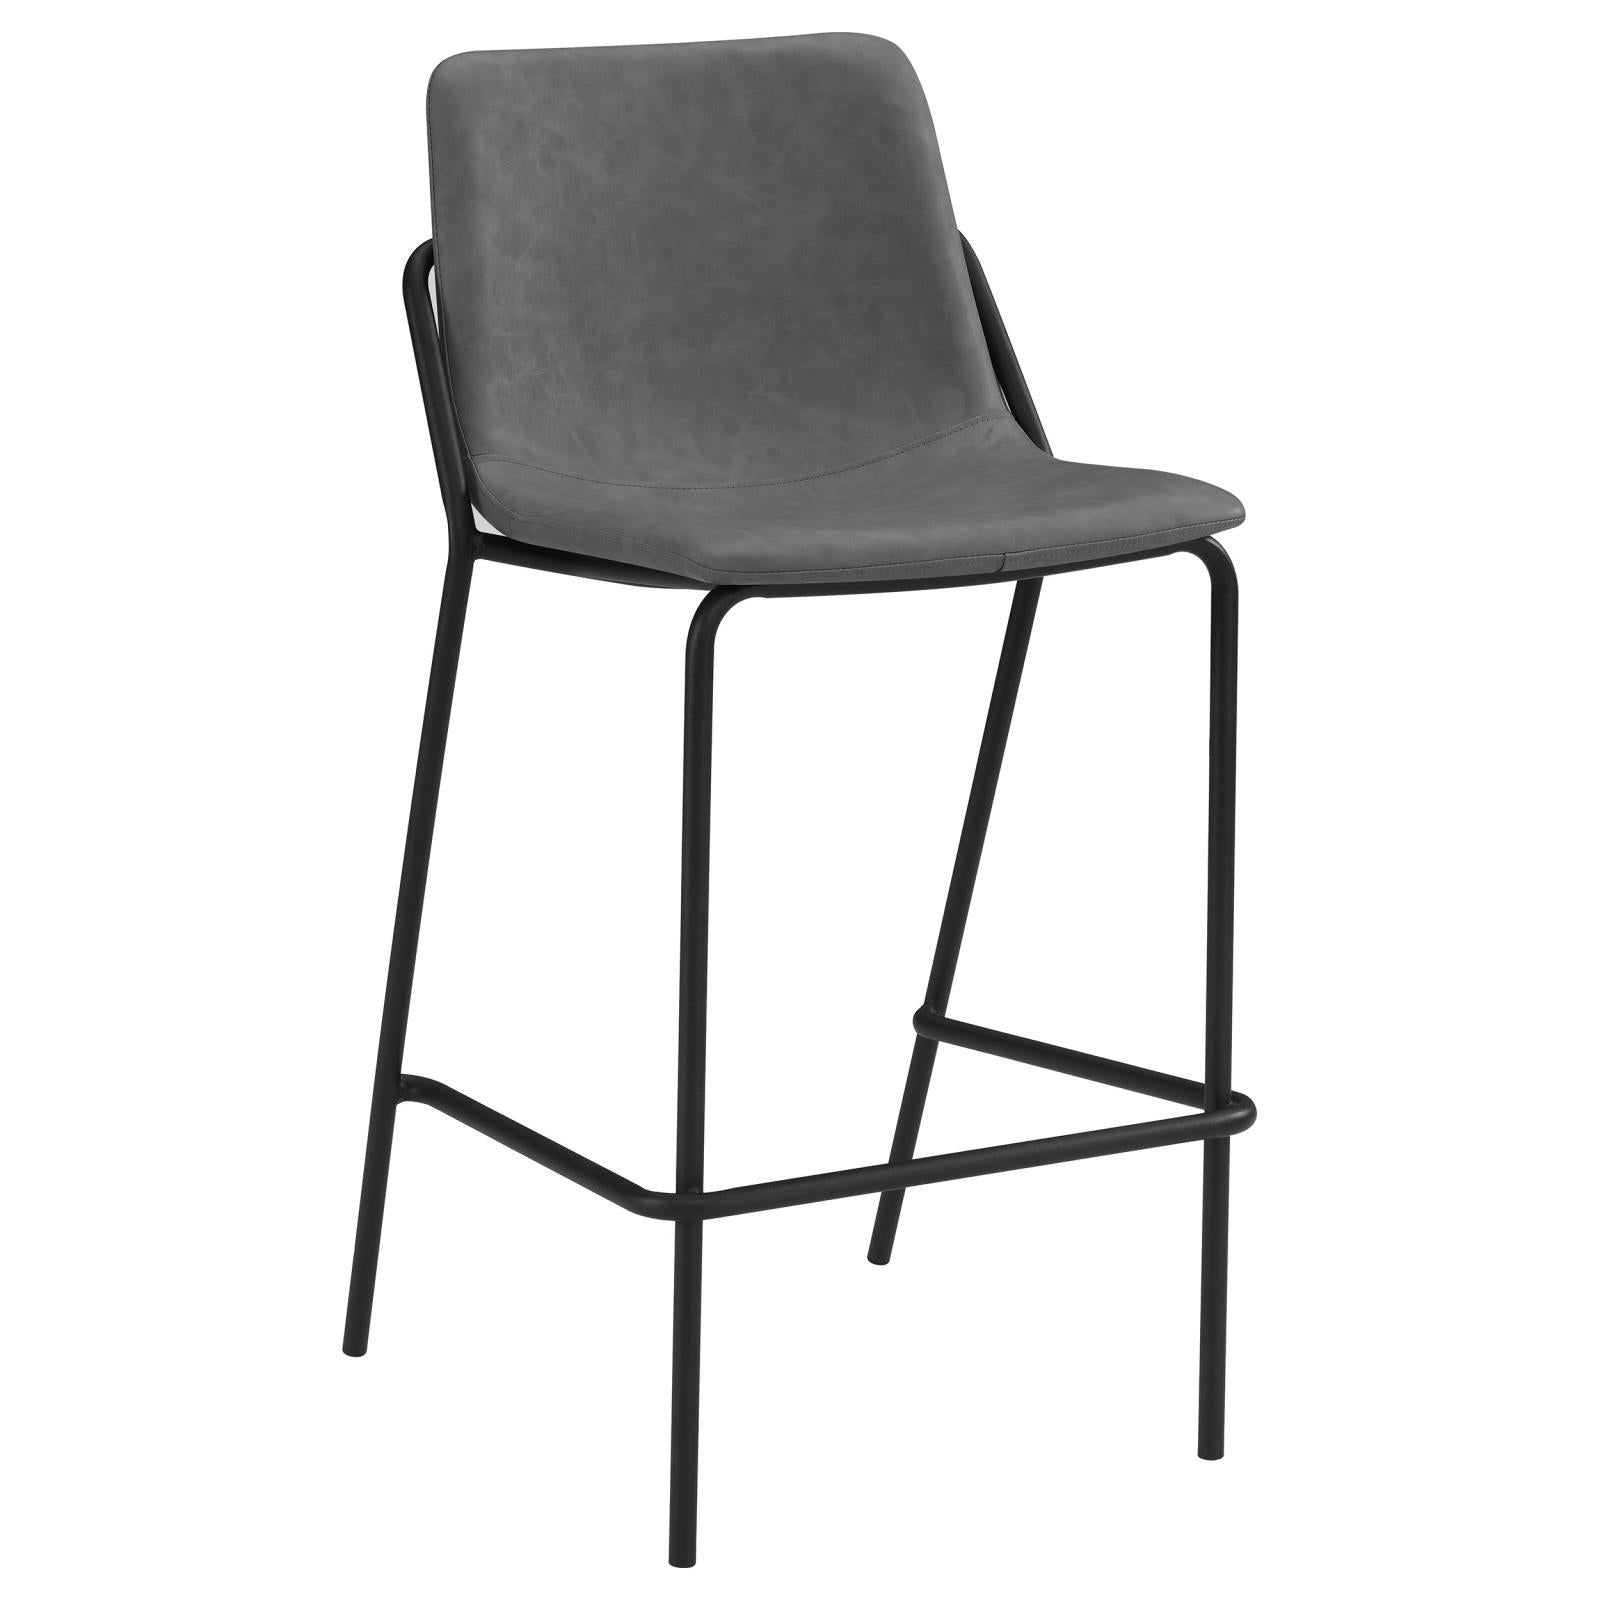 Grey and Black Bar Stools Set of 2 with Footrest